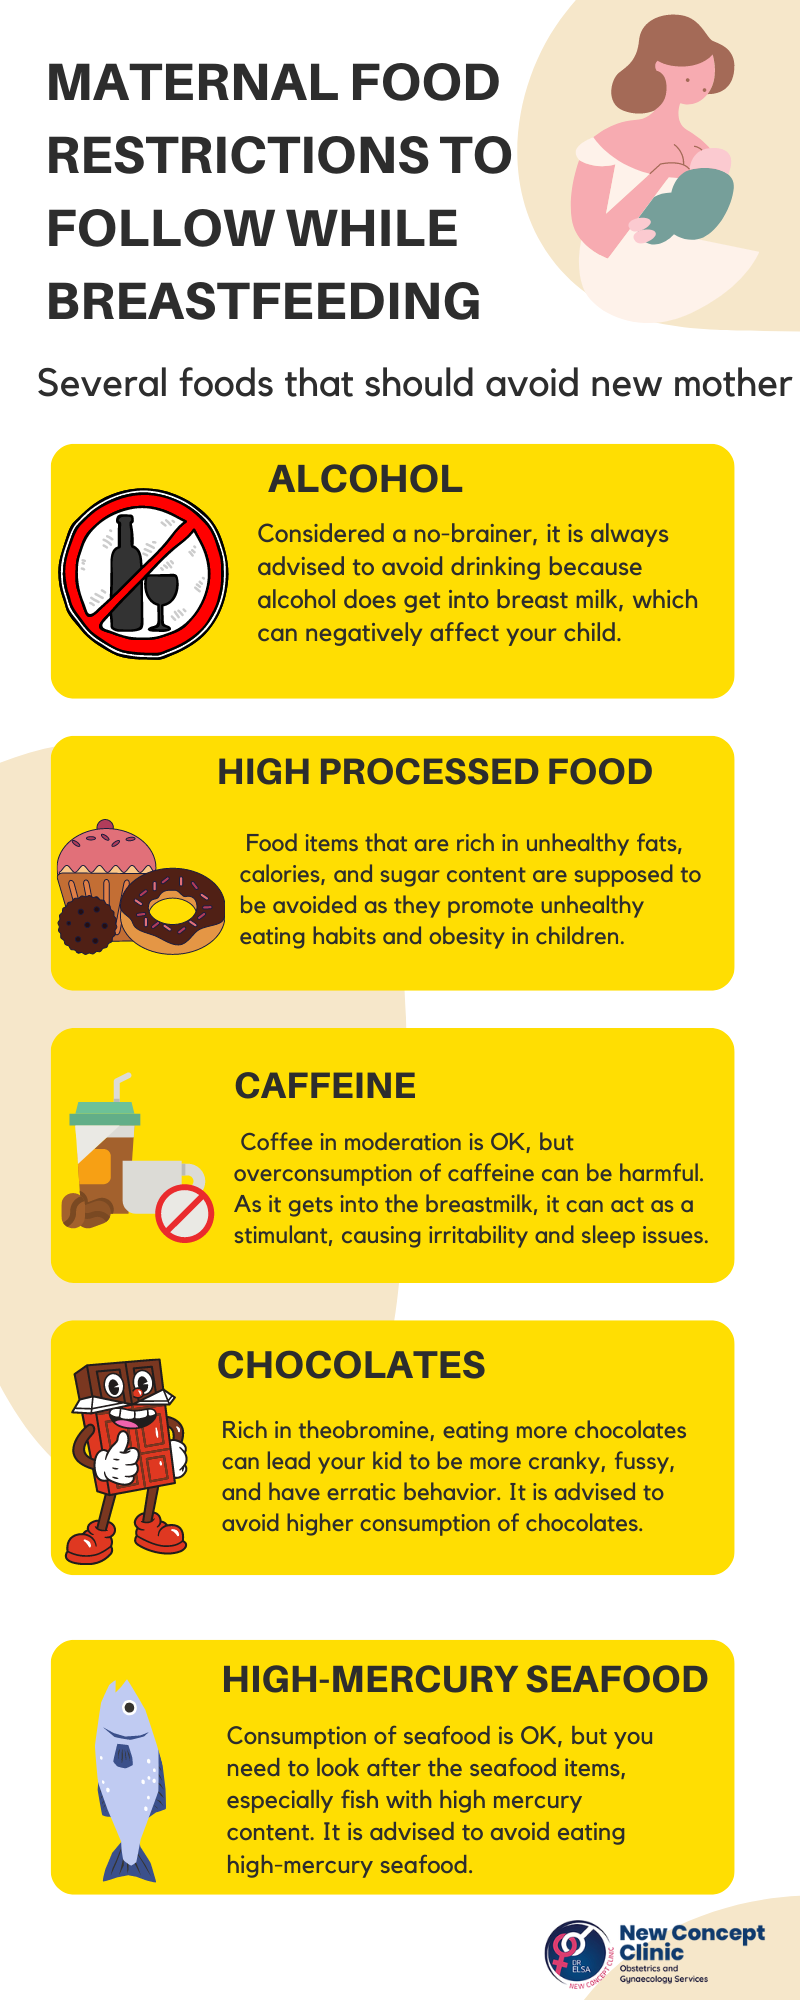 Foods to avoid while breastfeeding